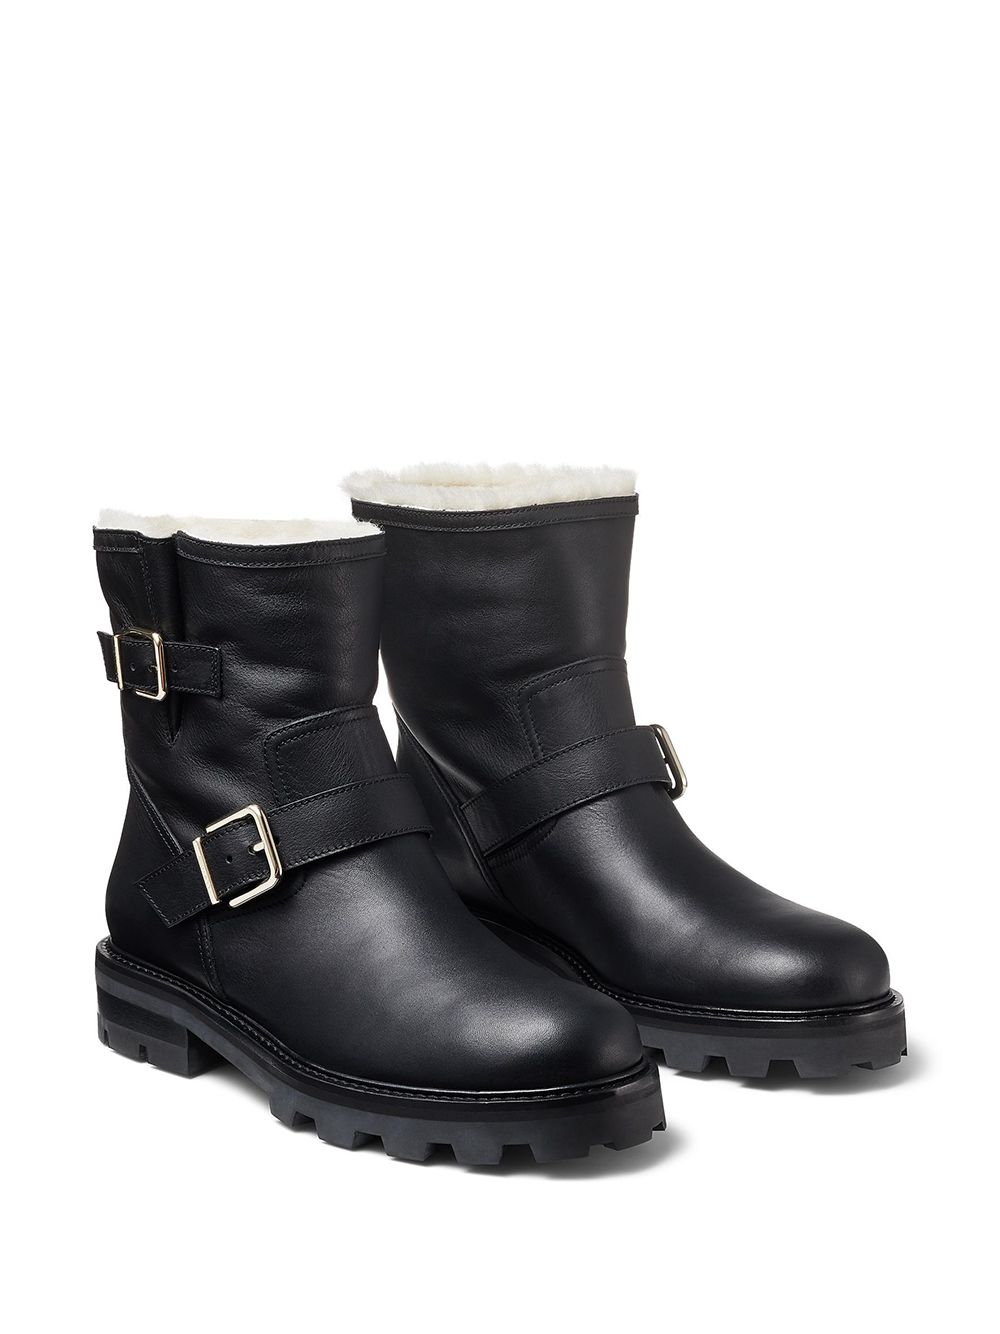 Image 2 of Jimmy Choo shearling-lined Youth II boots